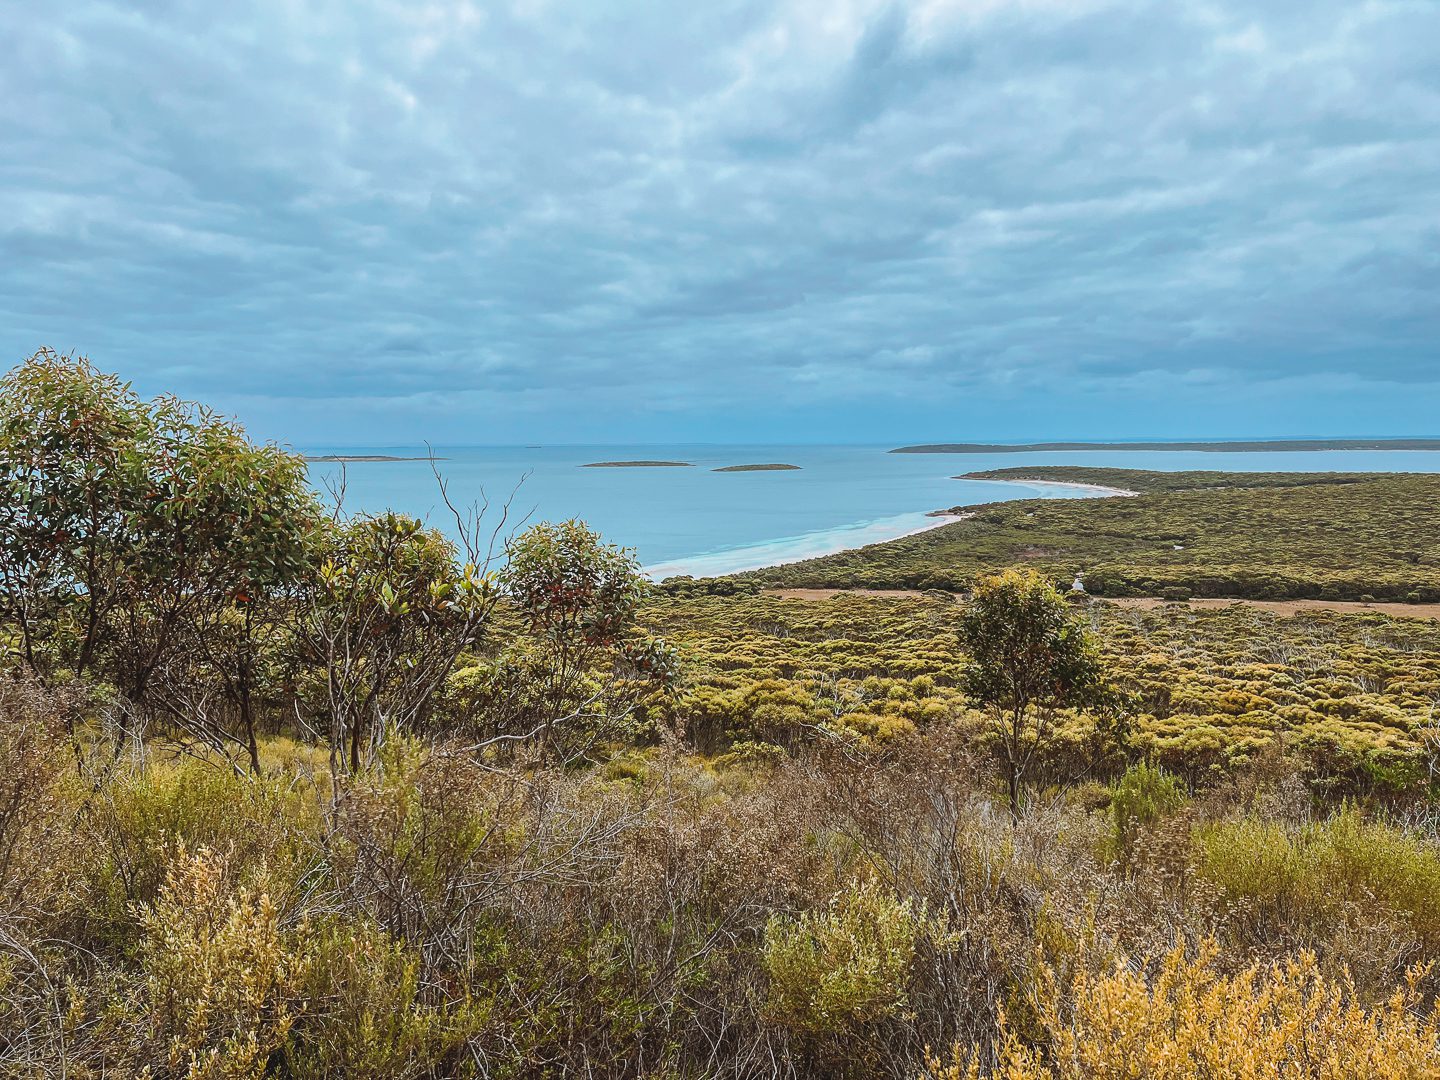 The beautiful coastline and beach at Lincoln National Park in Port Lincoln